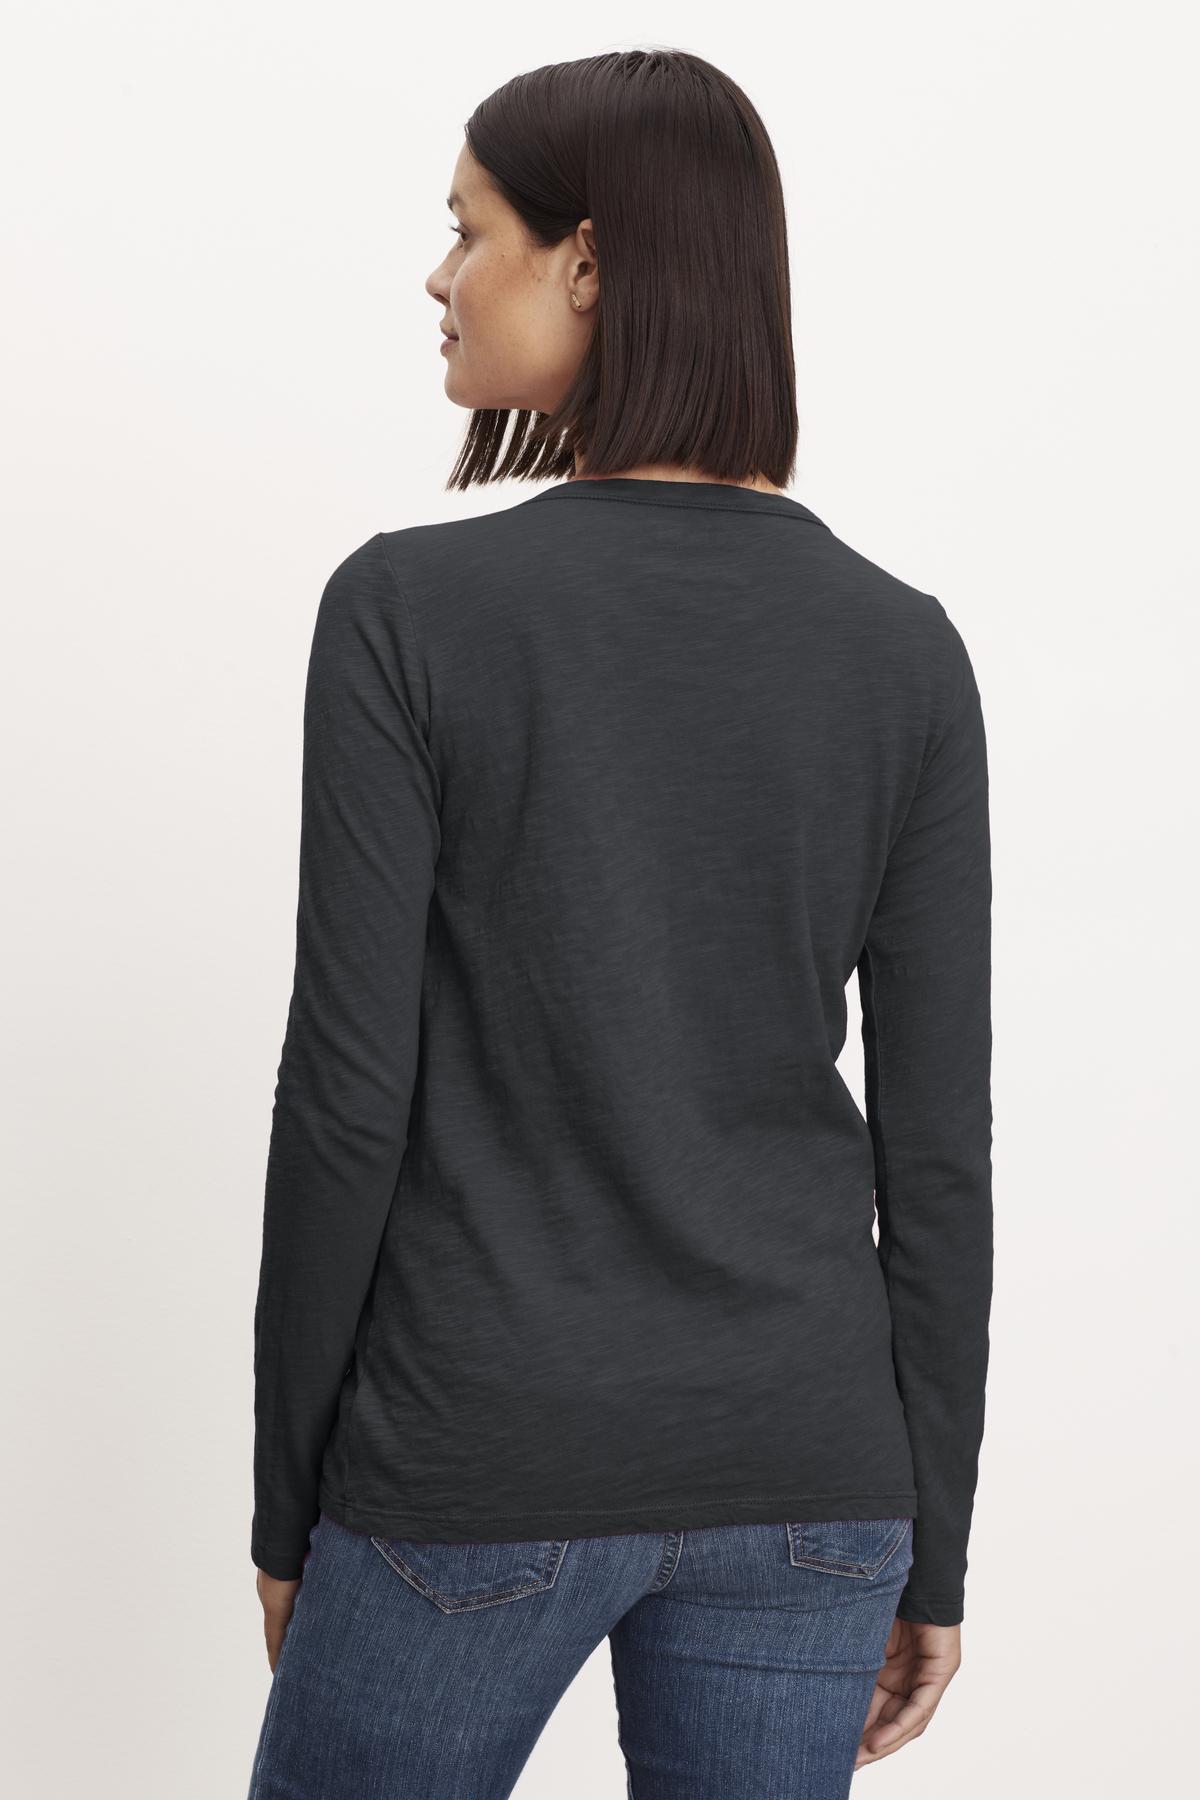 The back view of a woman wearing LIZZIE ORIGINAL SLUB LONG SLEEVE TEE by Velvet by Graham & Spencer jeans and a long-sleeved shirt.-35782988726465